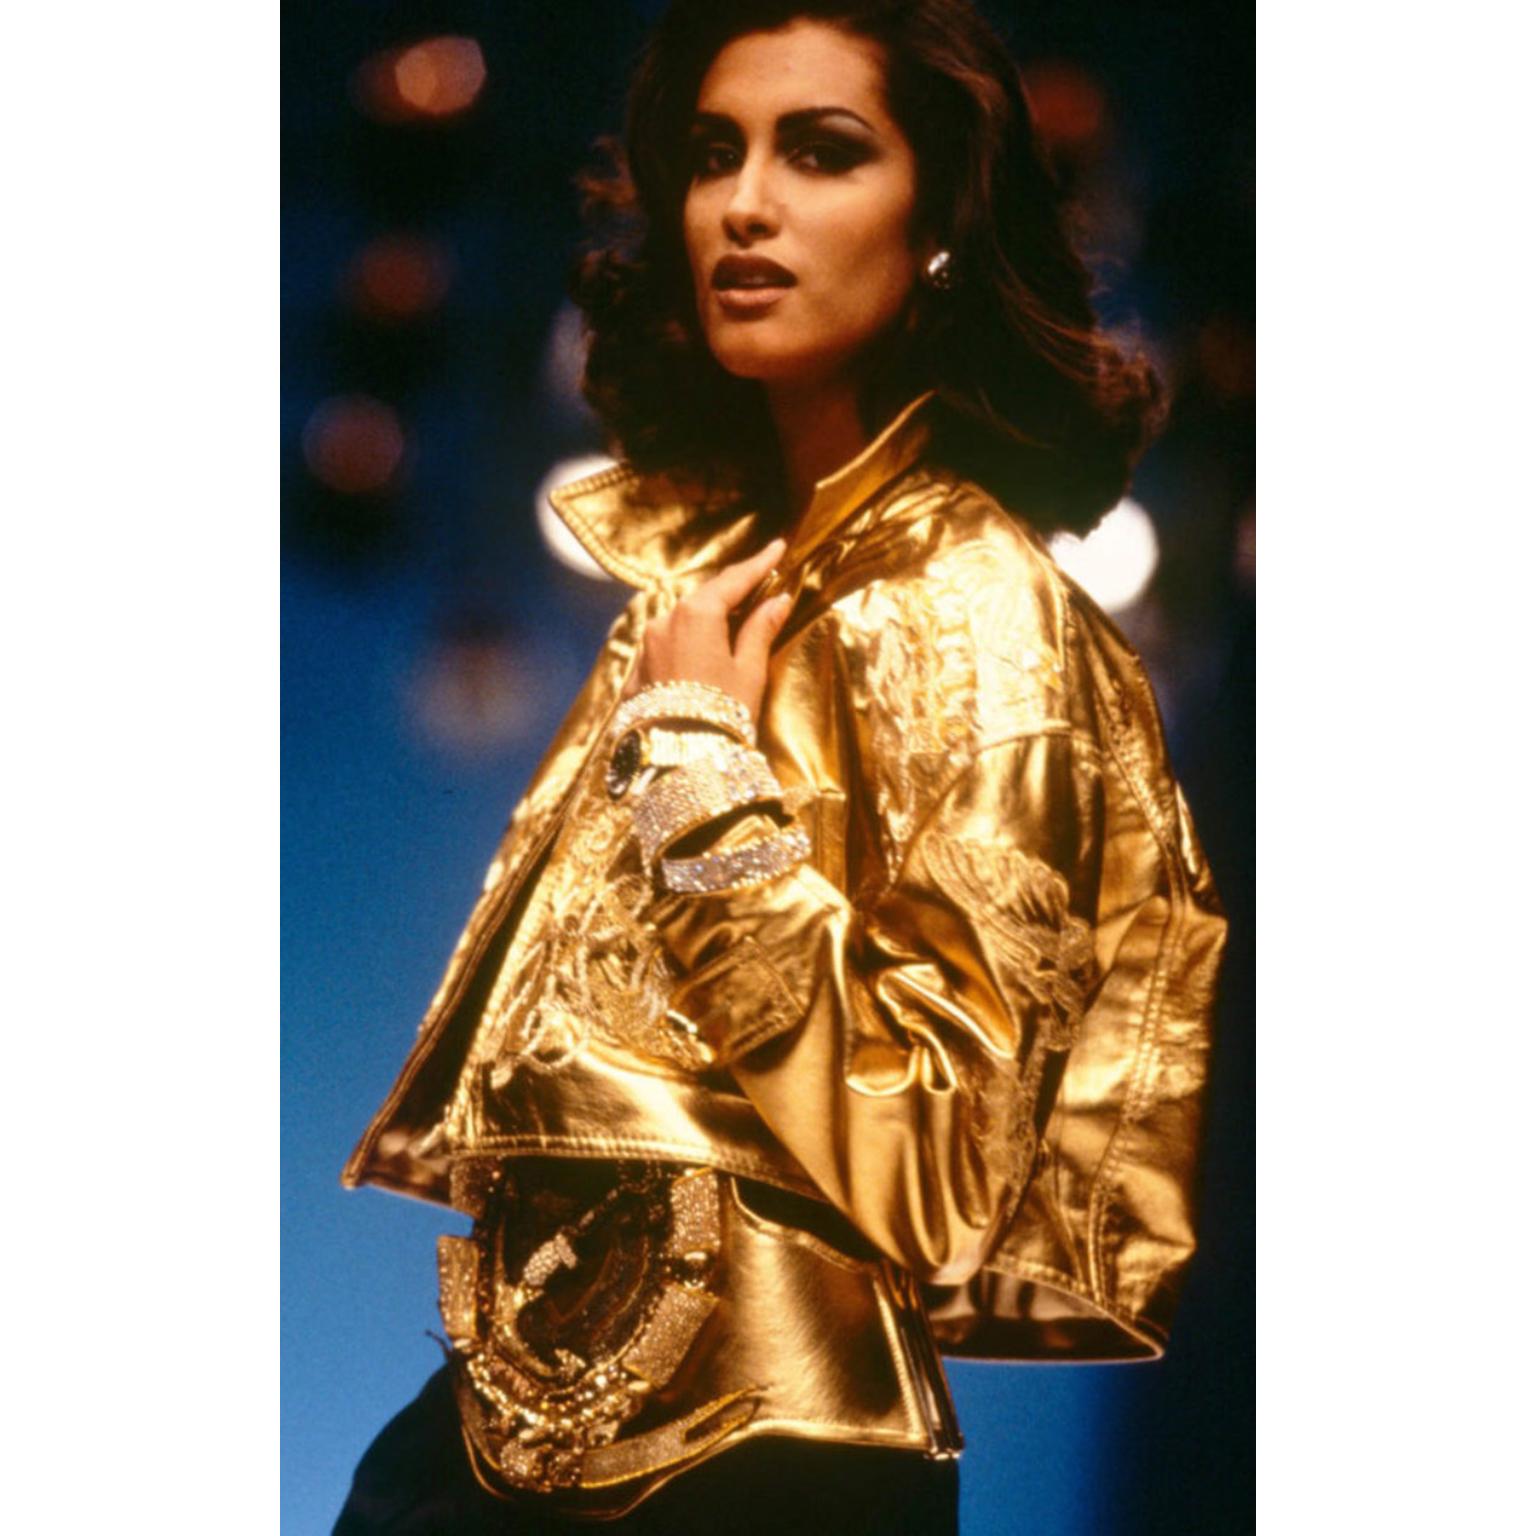 This vintage Gianfranco Ferre gold leather jacket is out of this world and appears to have never been worn! This fabulous documented jacket was featured on the Spring Summer 1992 runway as worn by Yasmeen Ghauri. Beautifully embroidered with